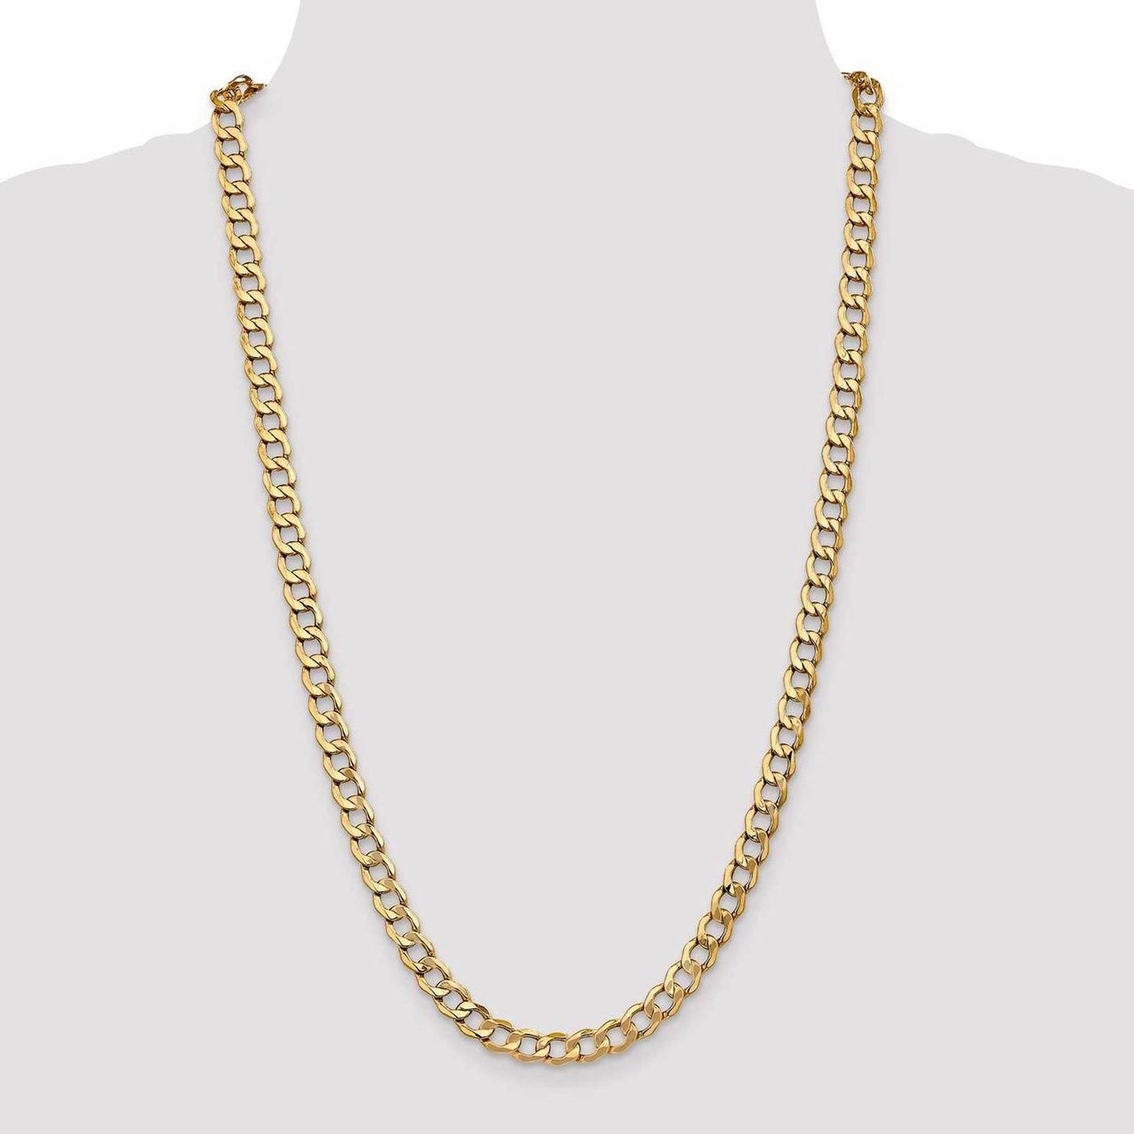 14K Yellow Gold 7.0mm Semi-Solid Curb Link Chain - Image 4 of 4